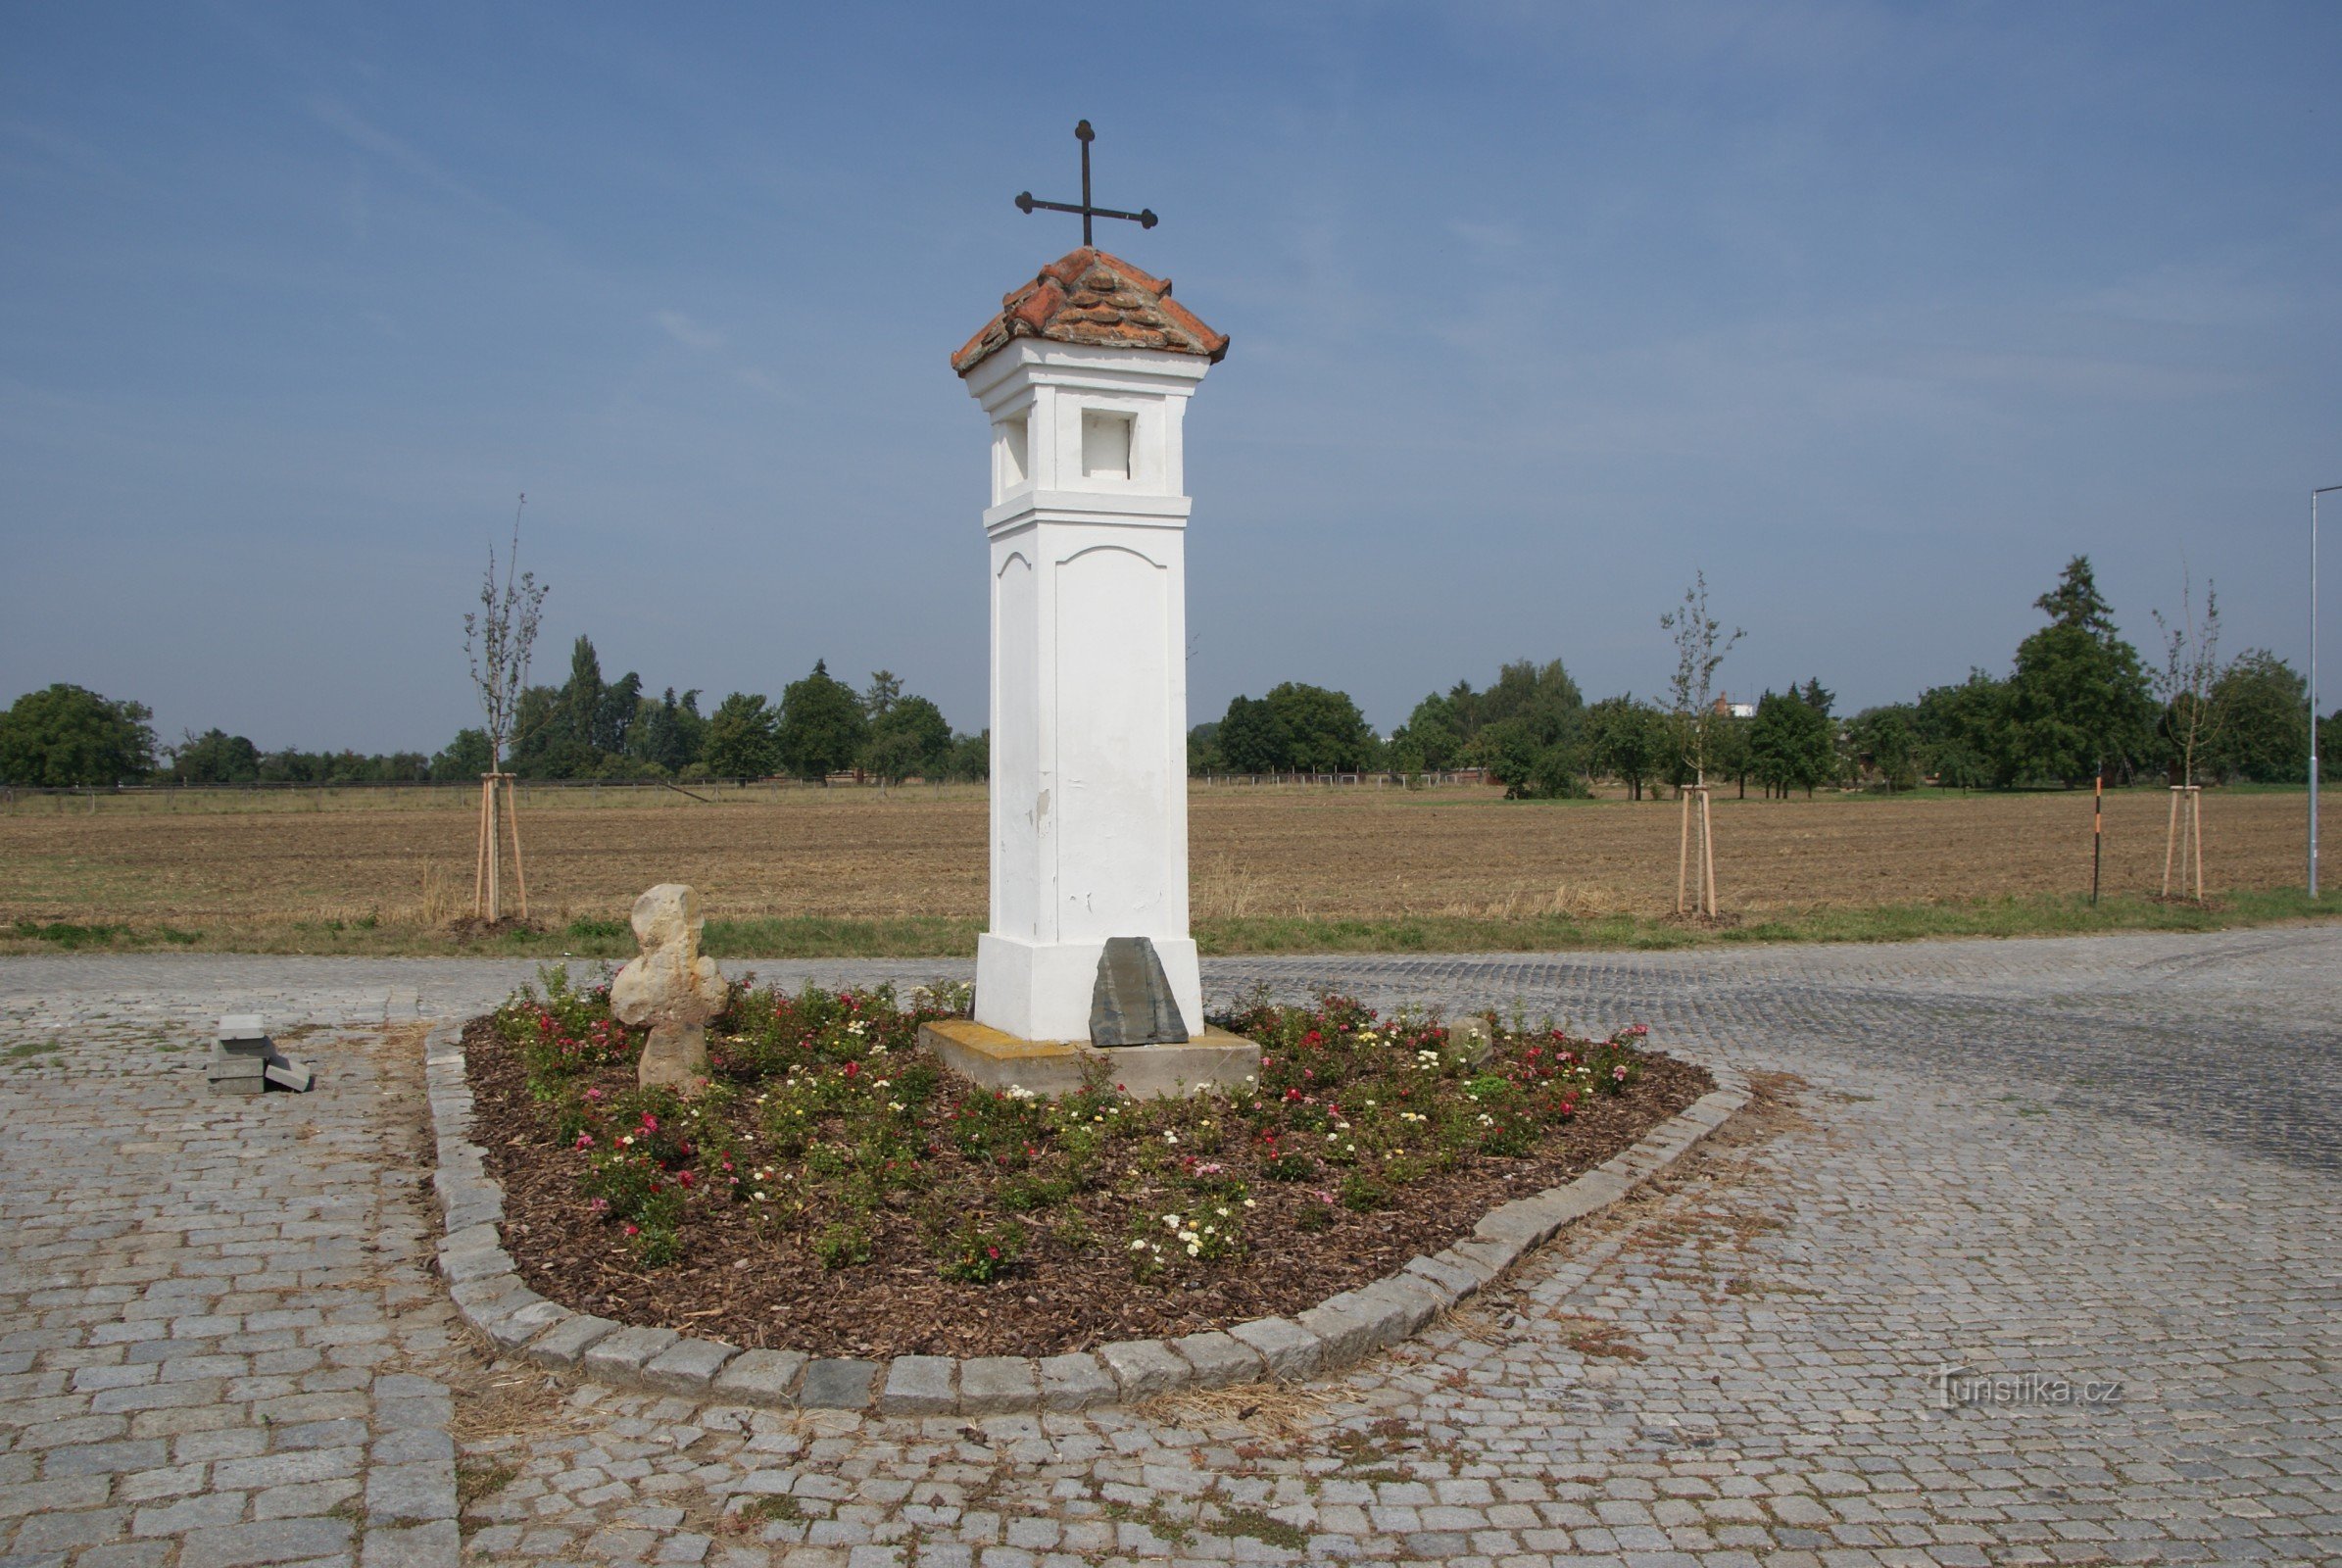 Orders (near Olomouc) - "new" peace cross at the agricultural scale